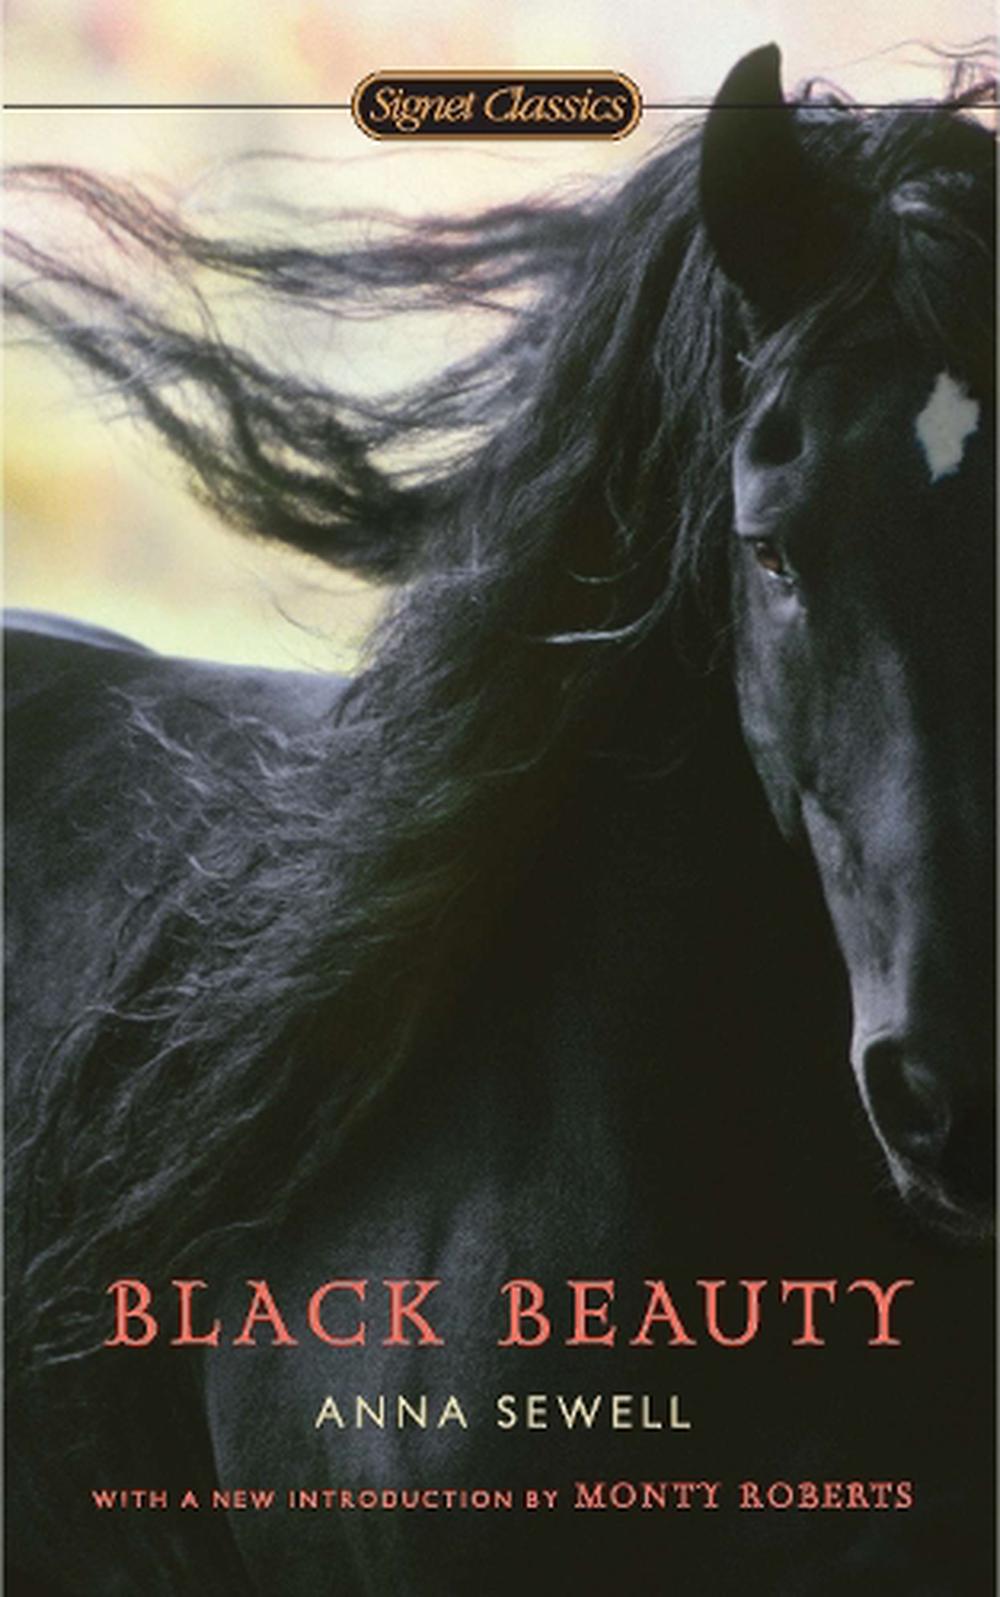 Black Beauty By Anna Sewell Paperback 9780451531742 Buy Online At